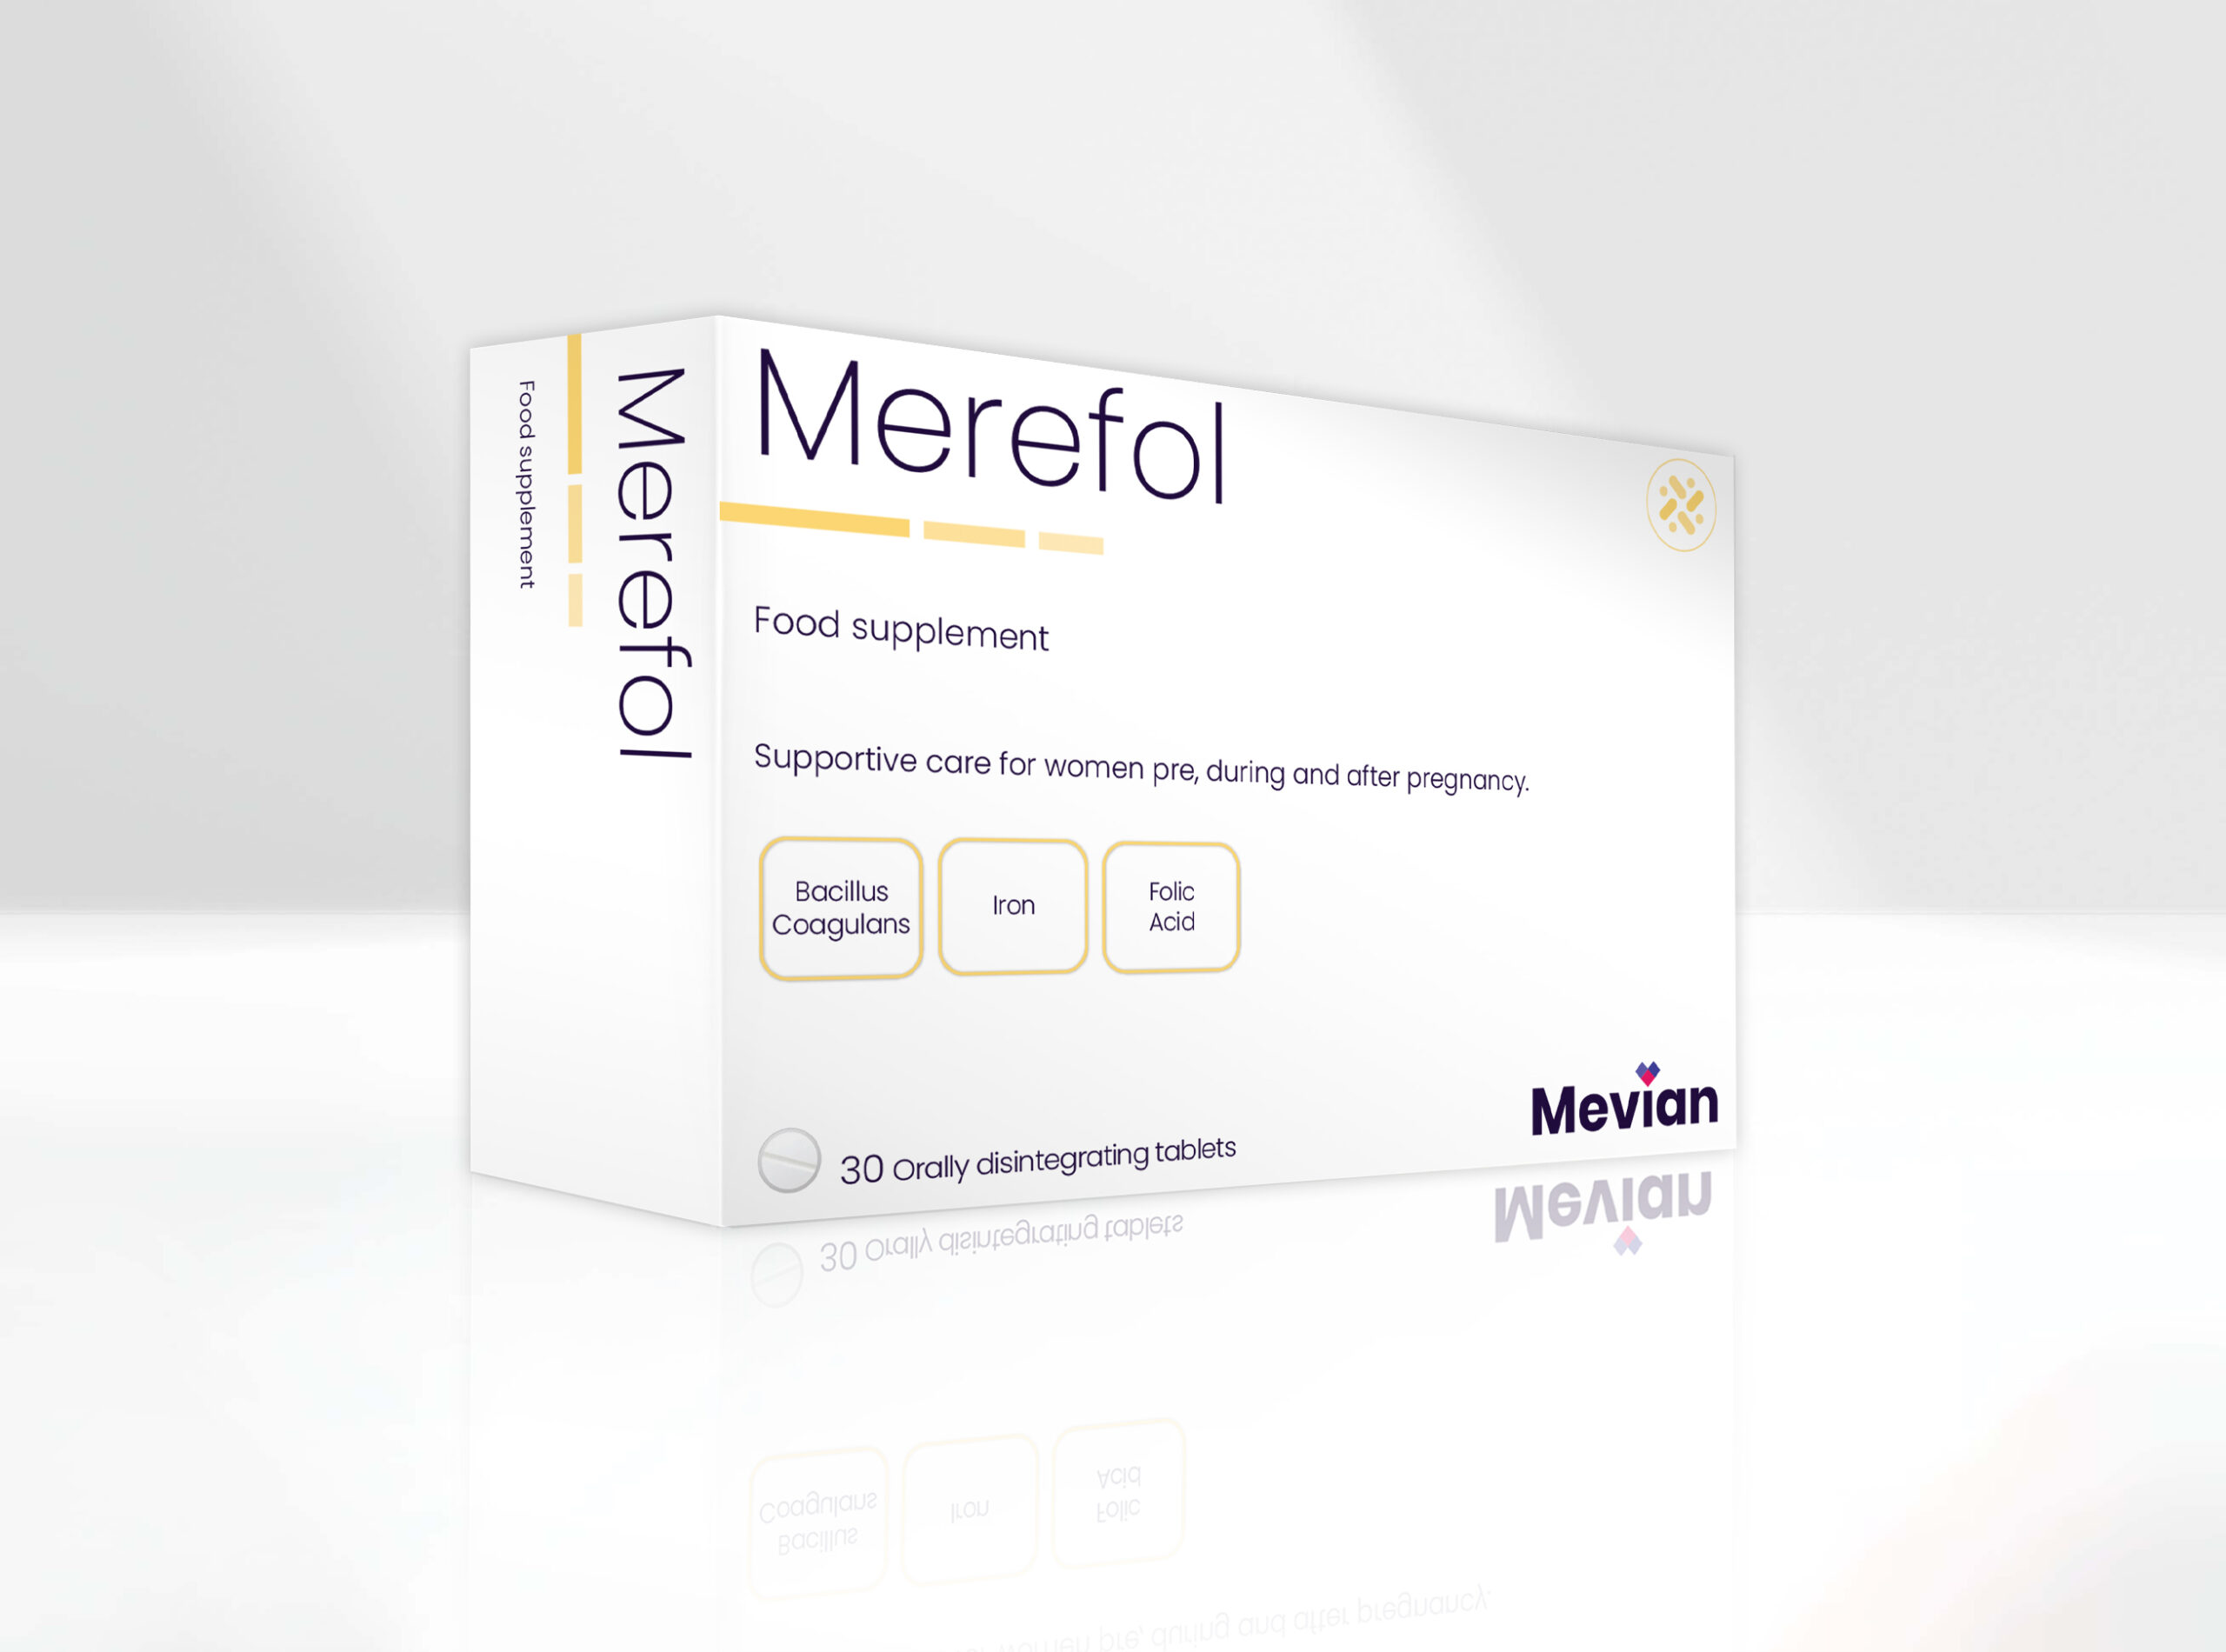 Merefol is a clinically supported probiotic of iron and folic acid that is indicated for the well-being of women pre, during, and after pregnancy and lactation.